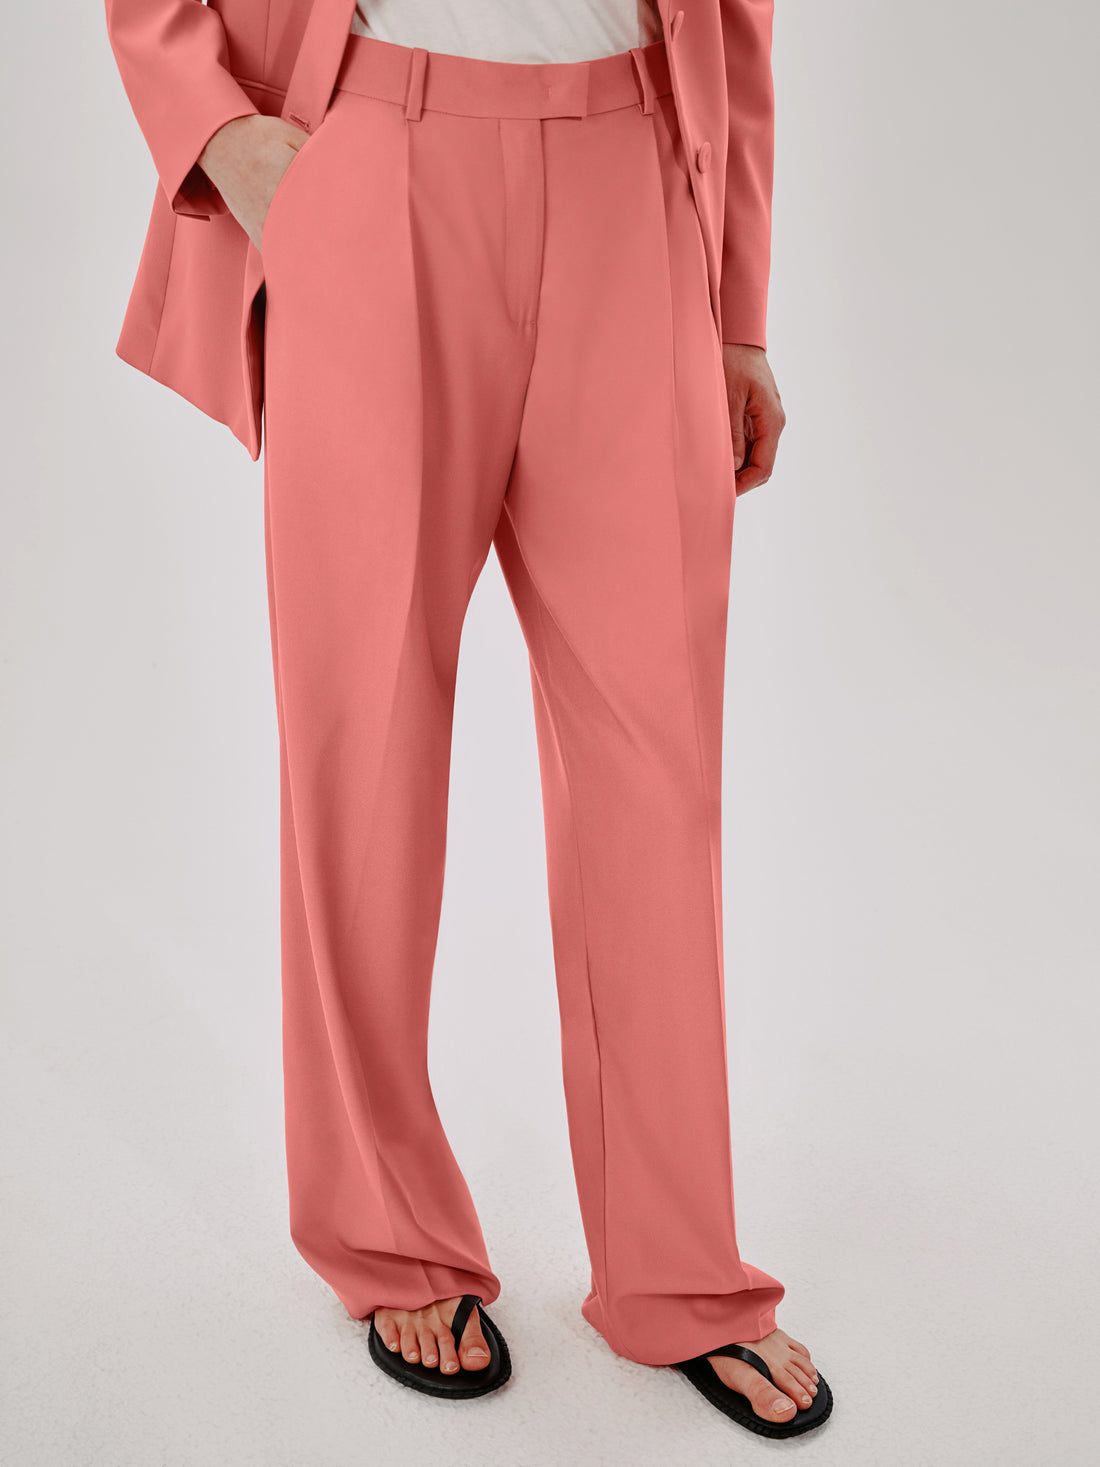 Product image44 with color pink